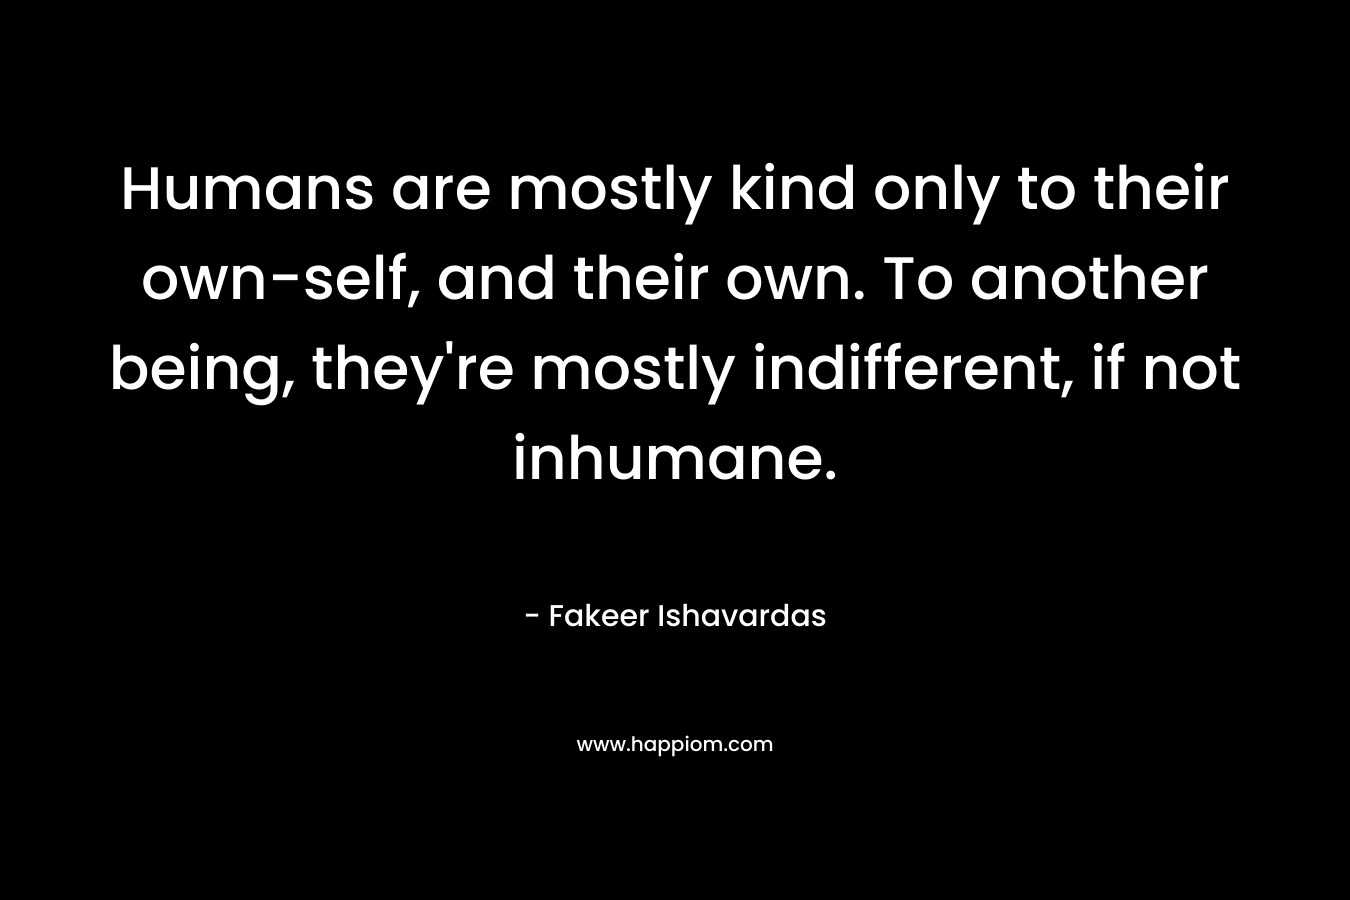 Humans are mostly kind only to their own-self, and their own. To another being, they’re mostly indifferent, if not inhumane. – Fakeer Ishavardas